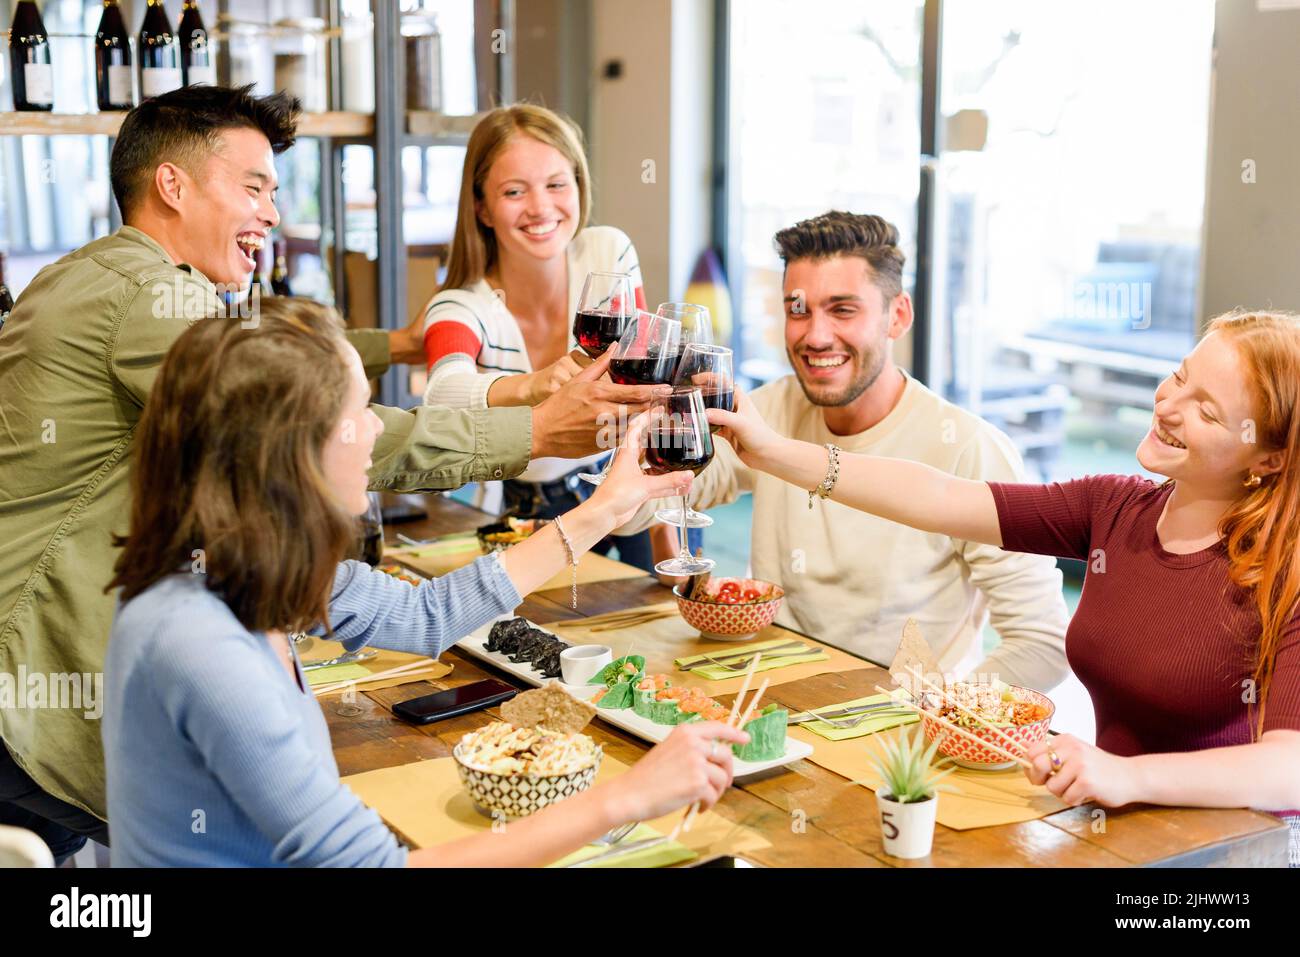 Group of cheerful multiracial friends looking at each other and clinking wineglasses with red wine while celebrating event together at table with food Stock Photo